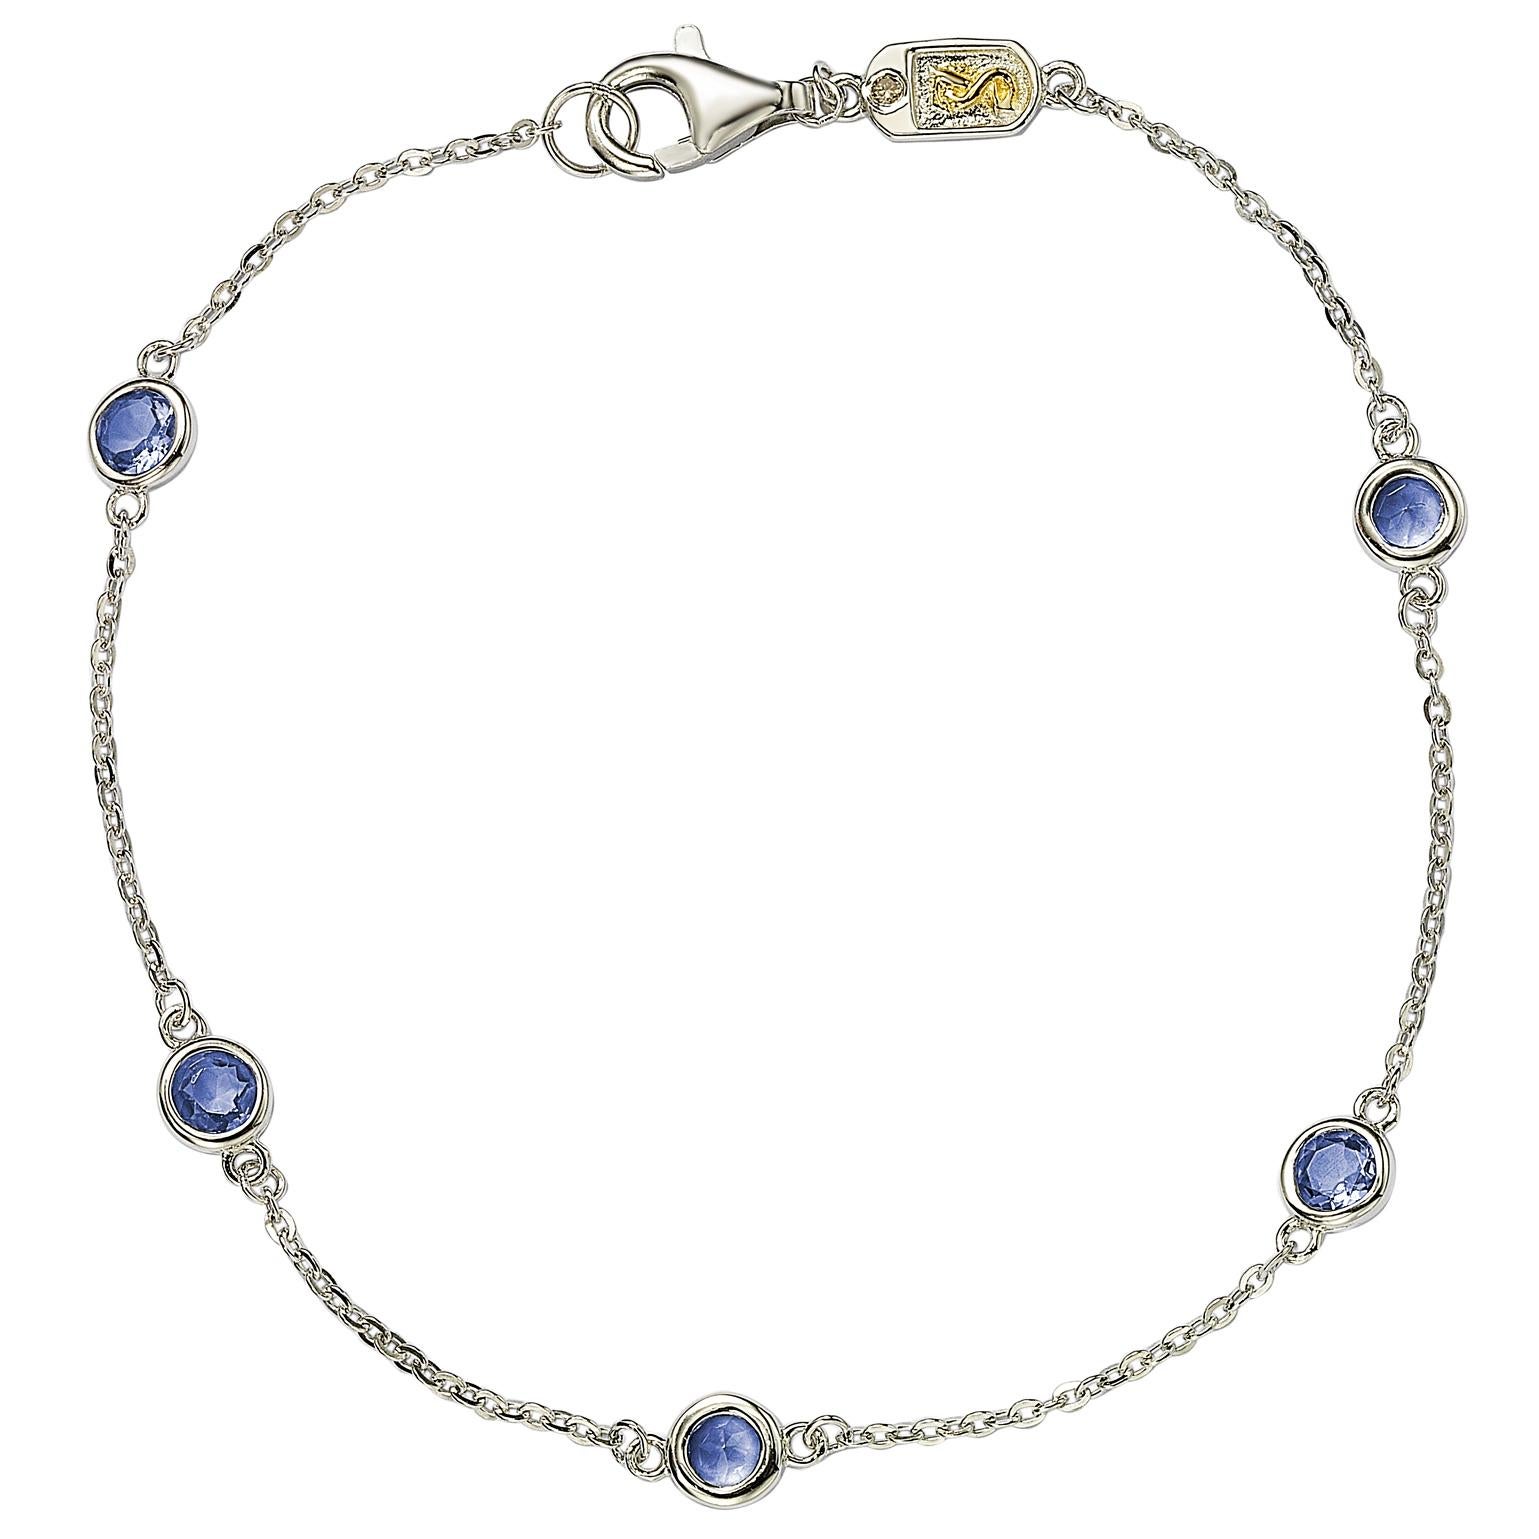 Adorn your hand with sparkling shimmers with this beautiful sapphire station bracelet. This bracelet can be worn stackable with other bracelets or as a single bracelet, making it the perfect bracelet for every occasion. This bracelet features five